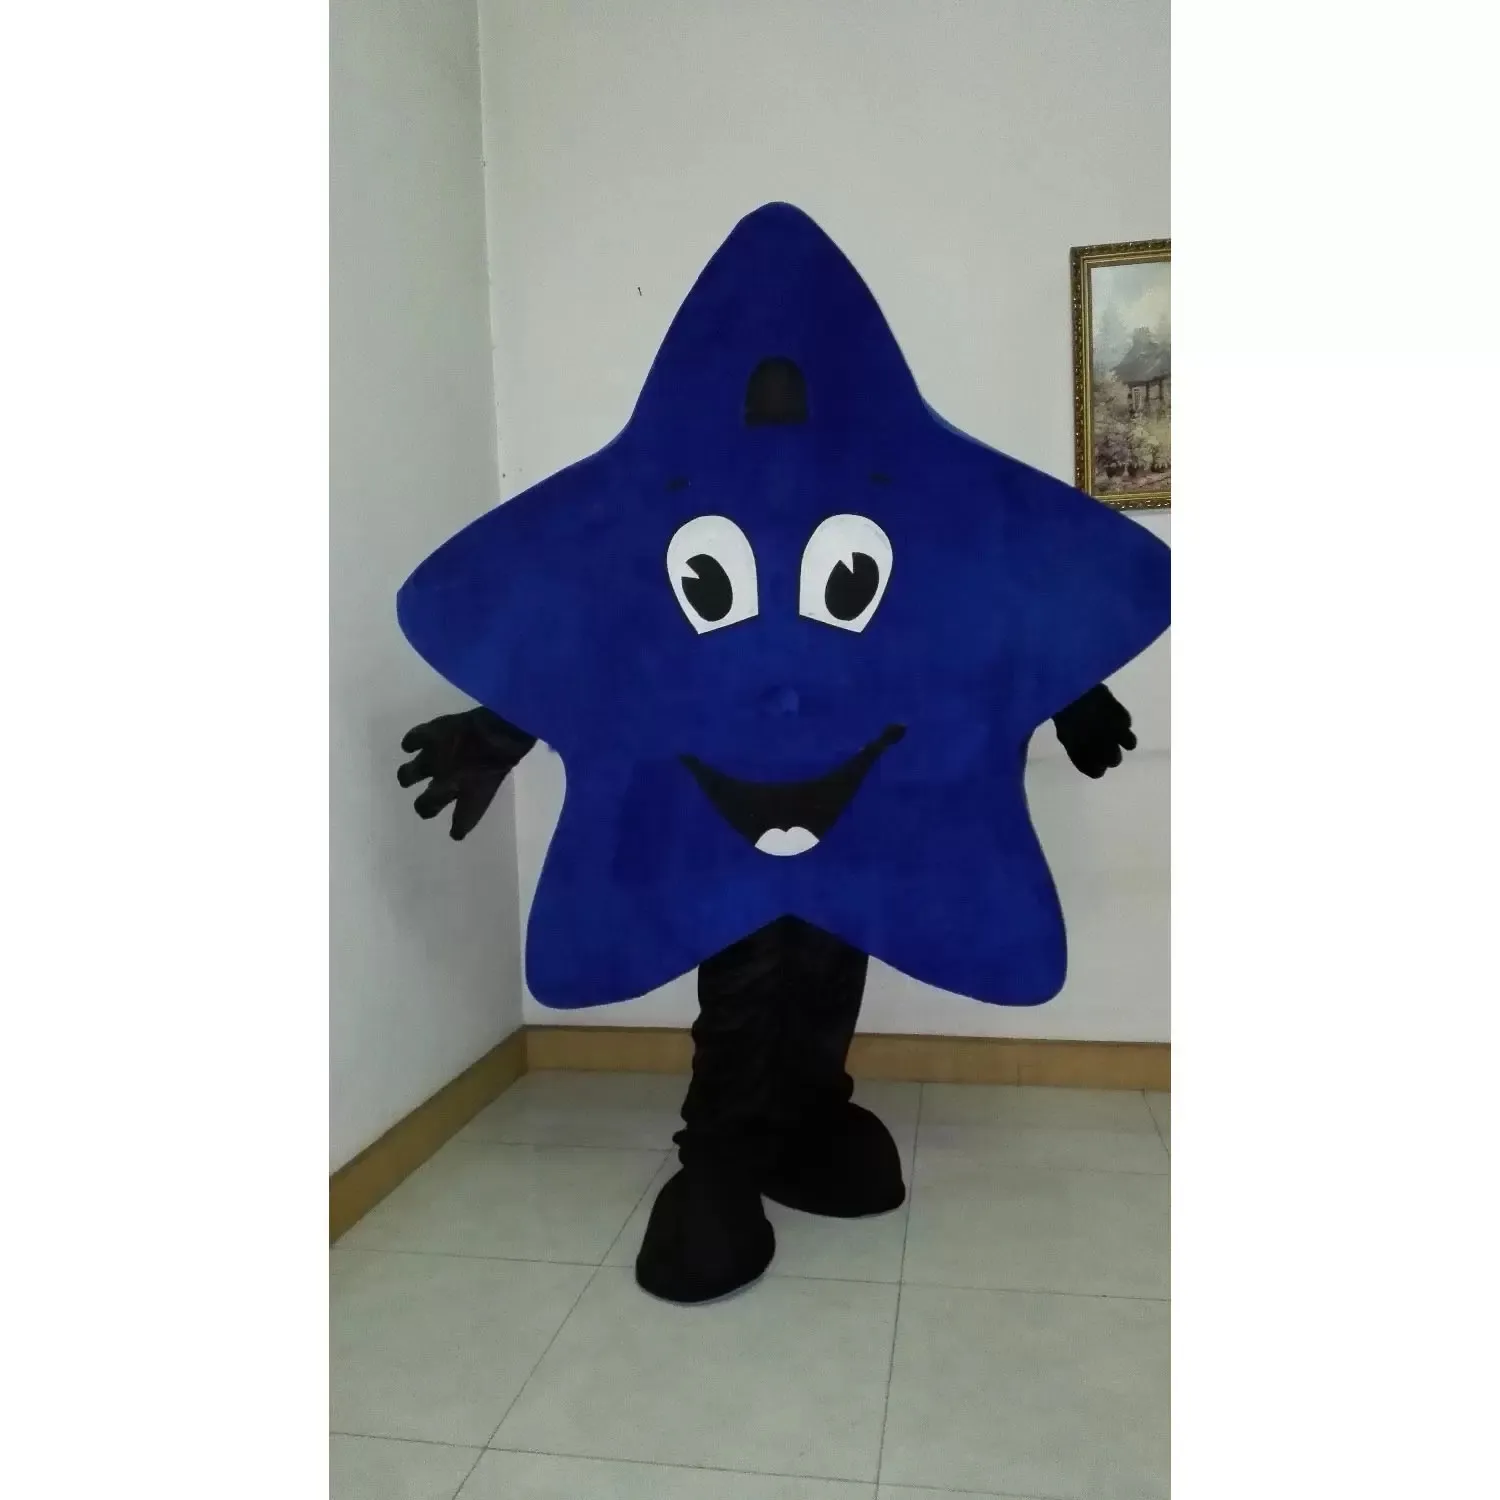 High Qualit Blue Star Mascot Kostym Halloween Jul Cartoon Character Outfits Suit Advertising Leaflets Clothings Carnival Unisex vuxna outfit